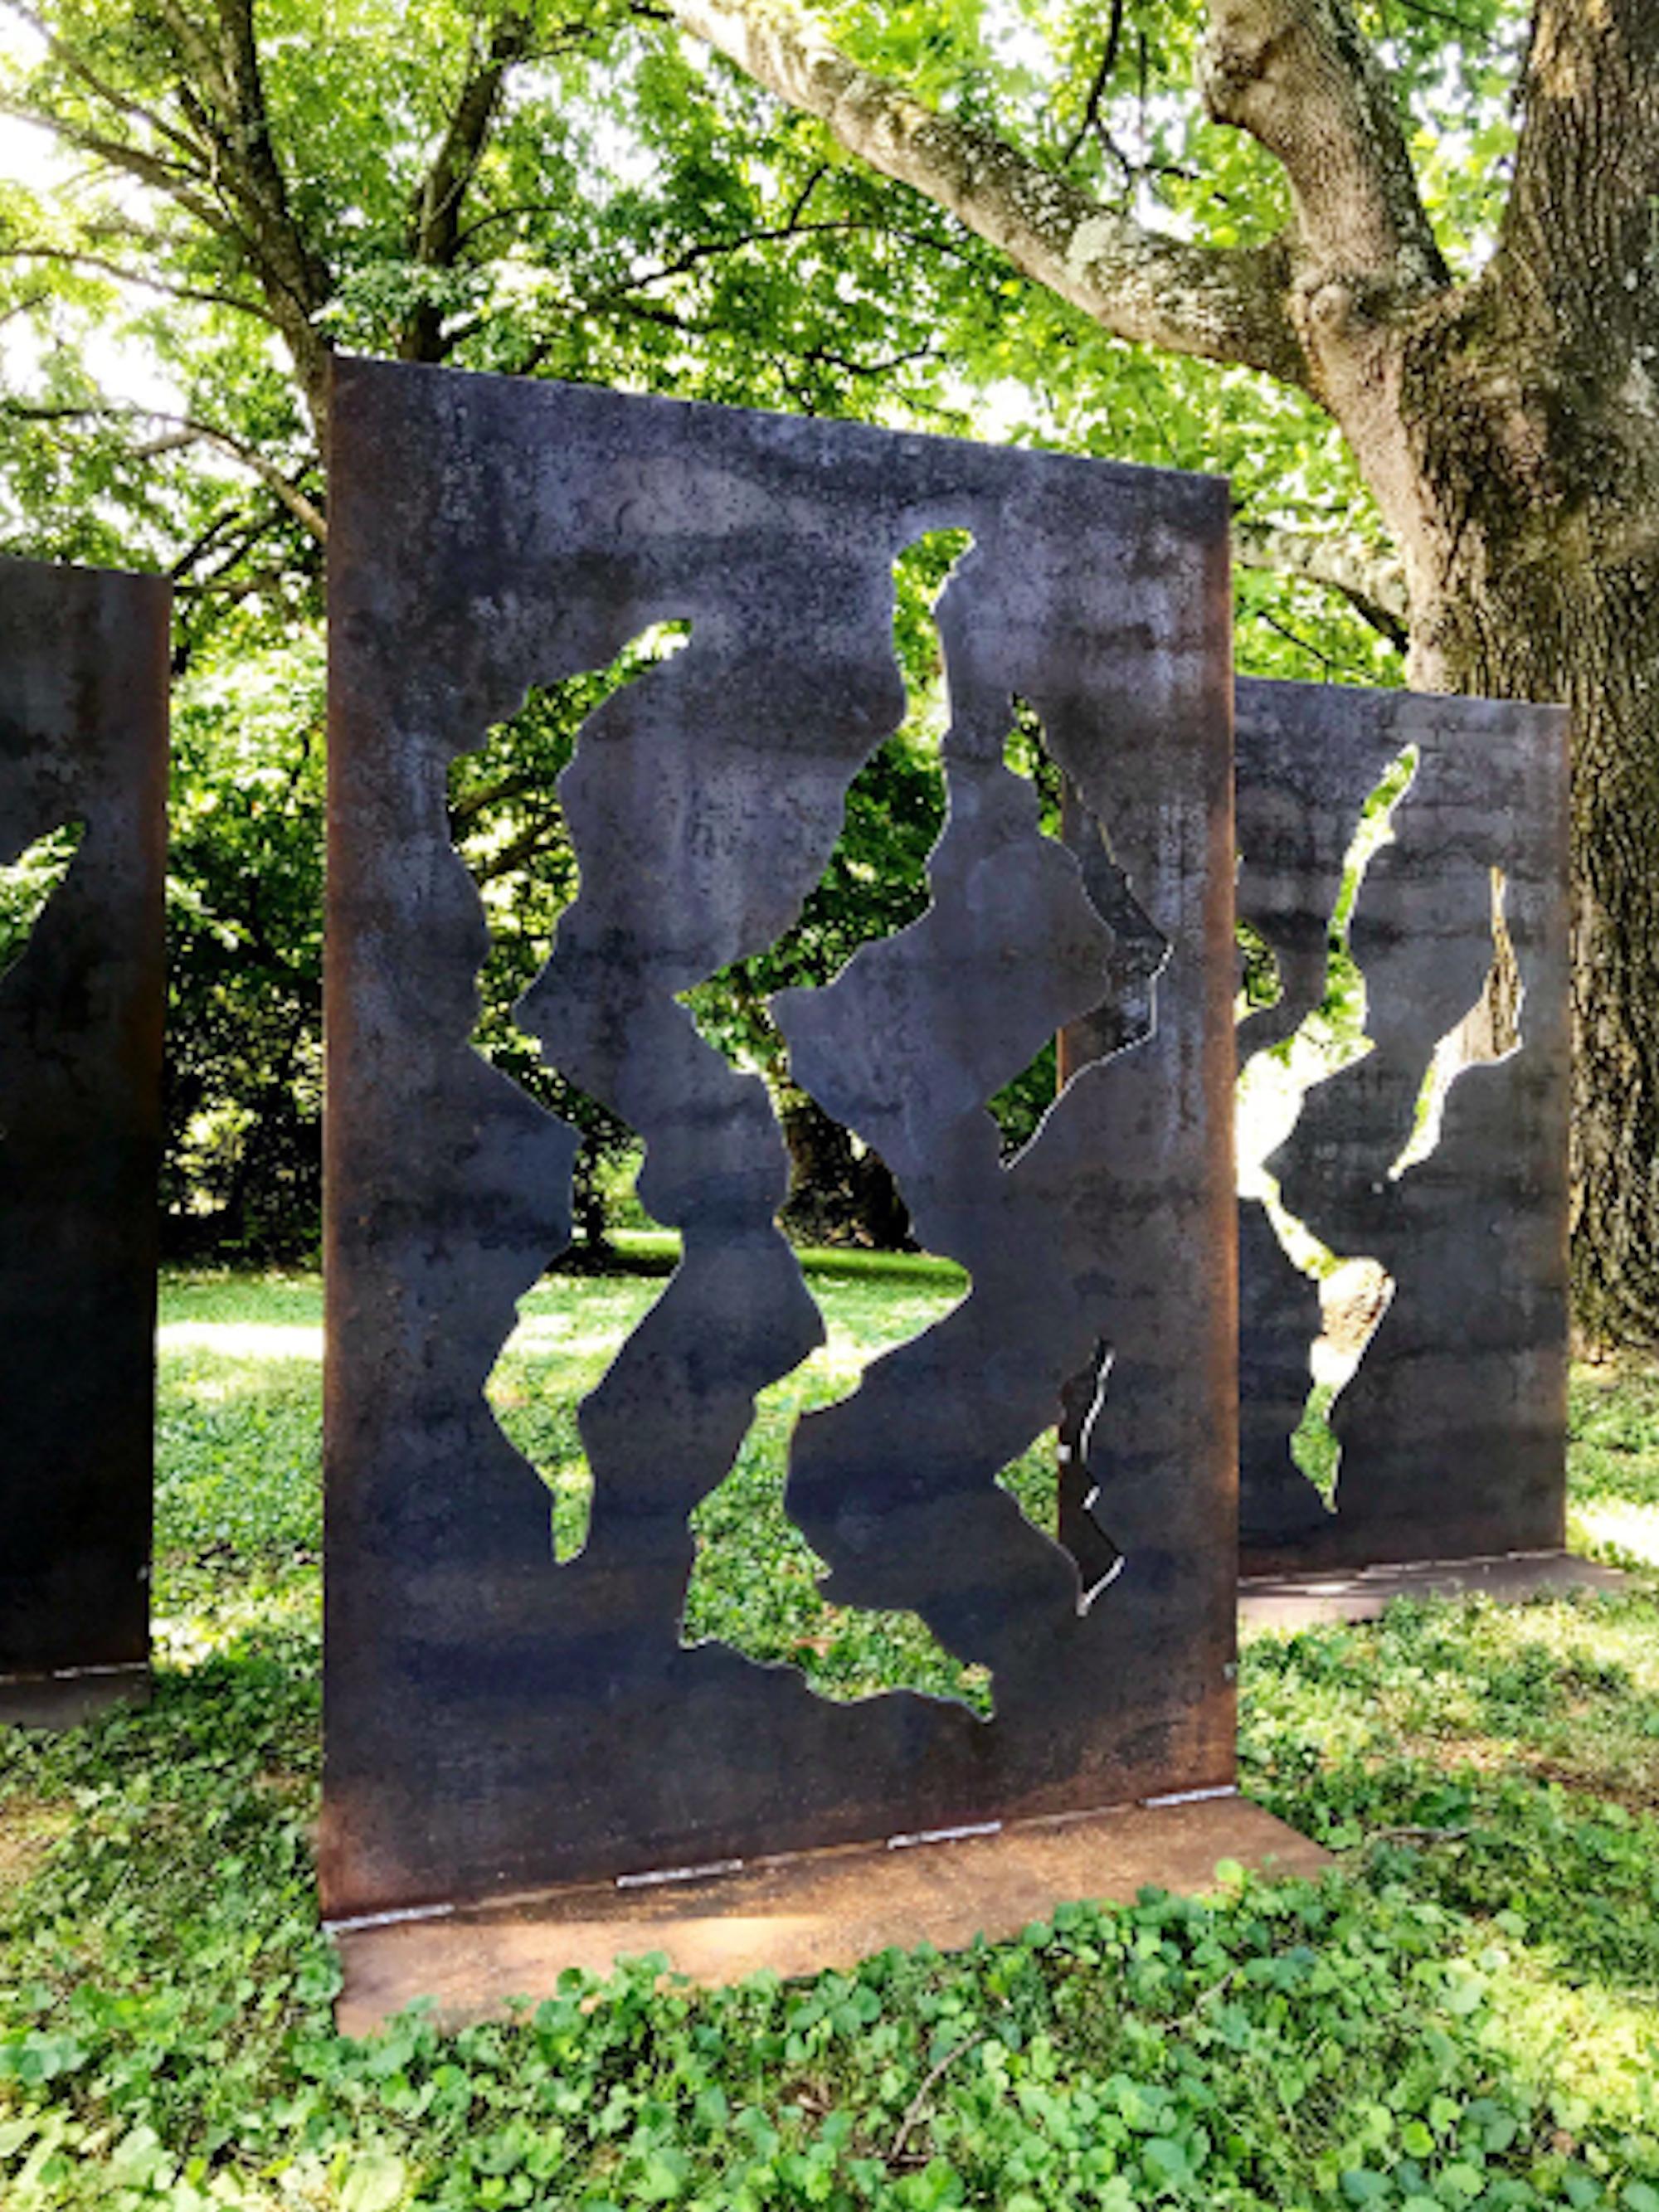 Hand-torch cut and welded freestanding outdoor sculpture made of mild steel.  Natural artistic patina.  The bases are welded on and can be left above ground or below.

Each sculpture is 72” tall x 48” wide with a 24”x 48” base. Weight per sculpture